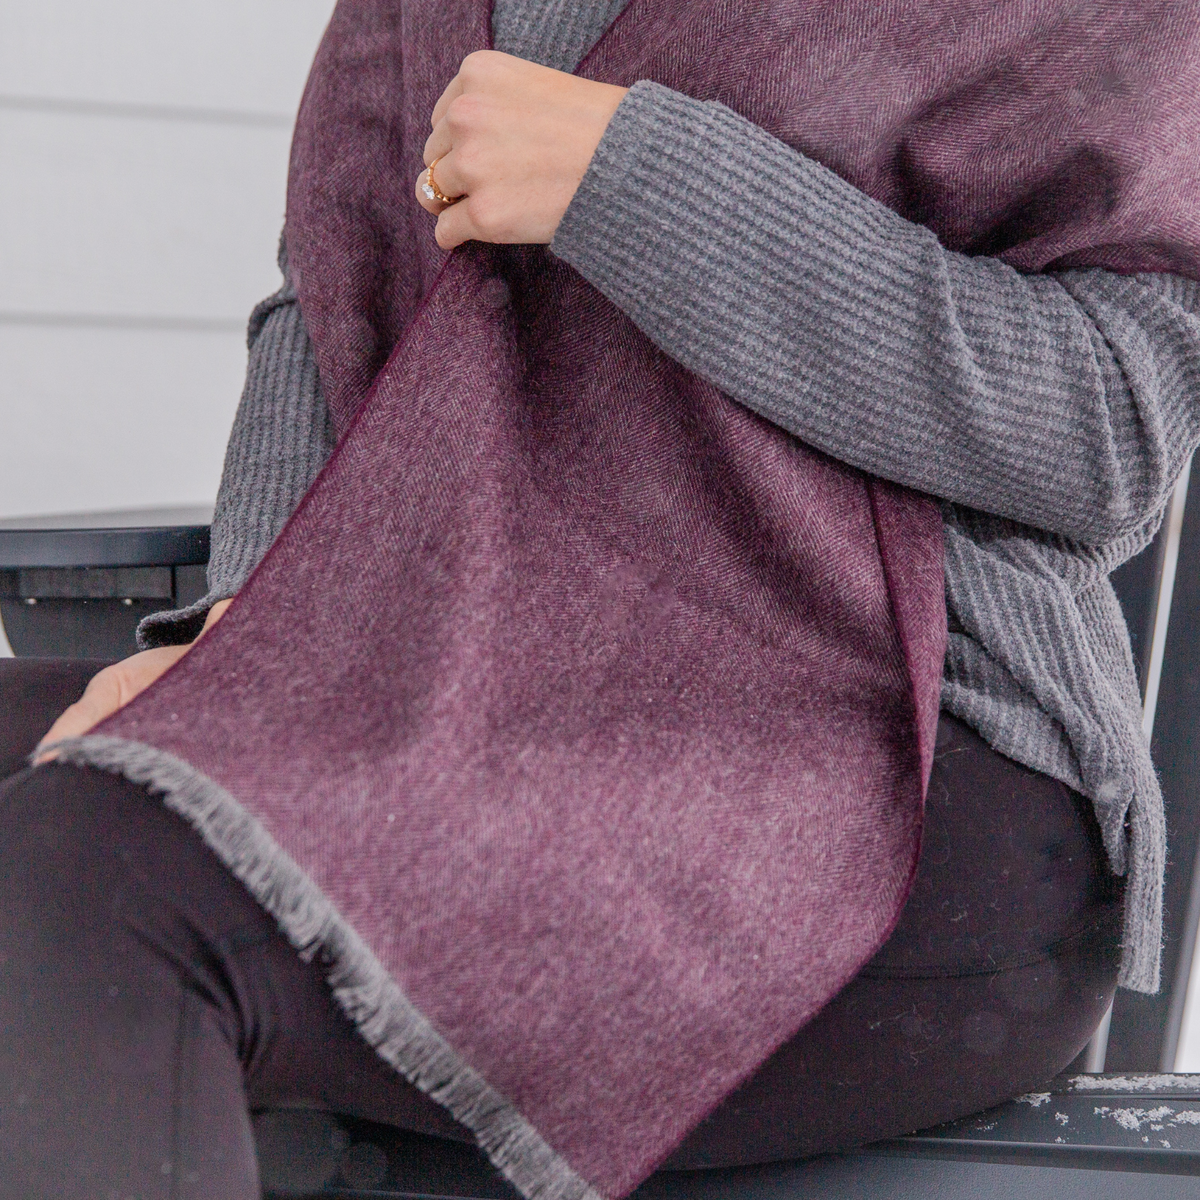 A close up photo of a person wearing black pants, a gray long sleeved shirt, and a soft cozy stylish comfortable women&#39;s fashion moisture wicking warm cute lovely herringbone patterned plum purple violet and gray alpaca wool scarf.